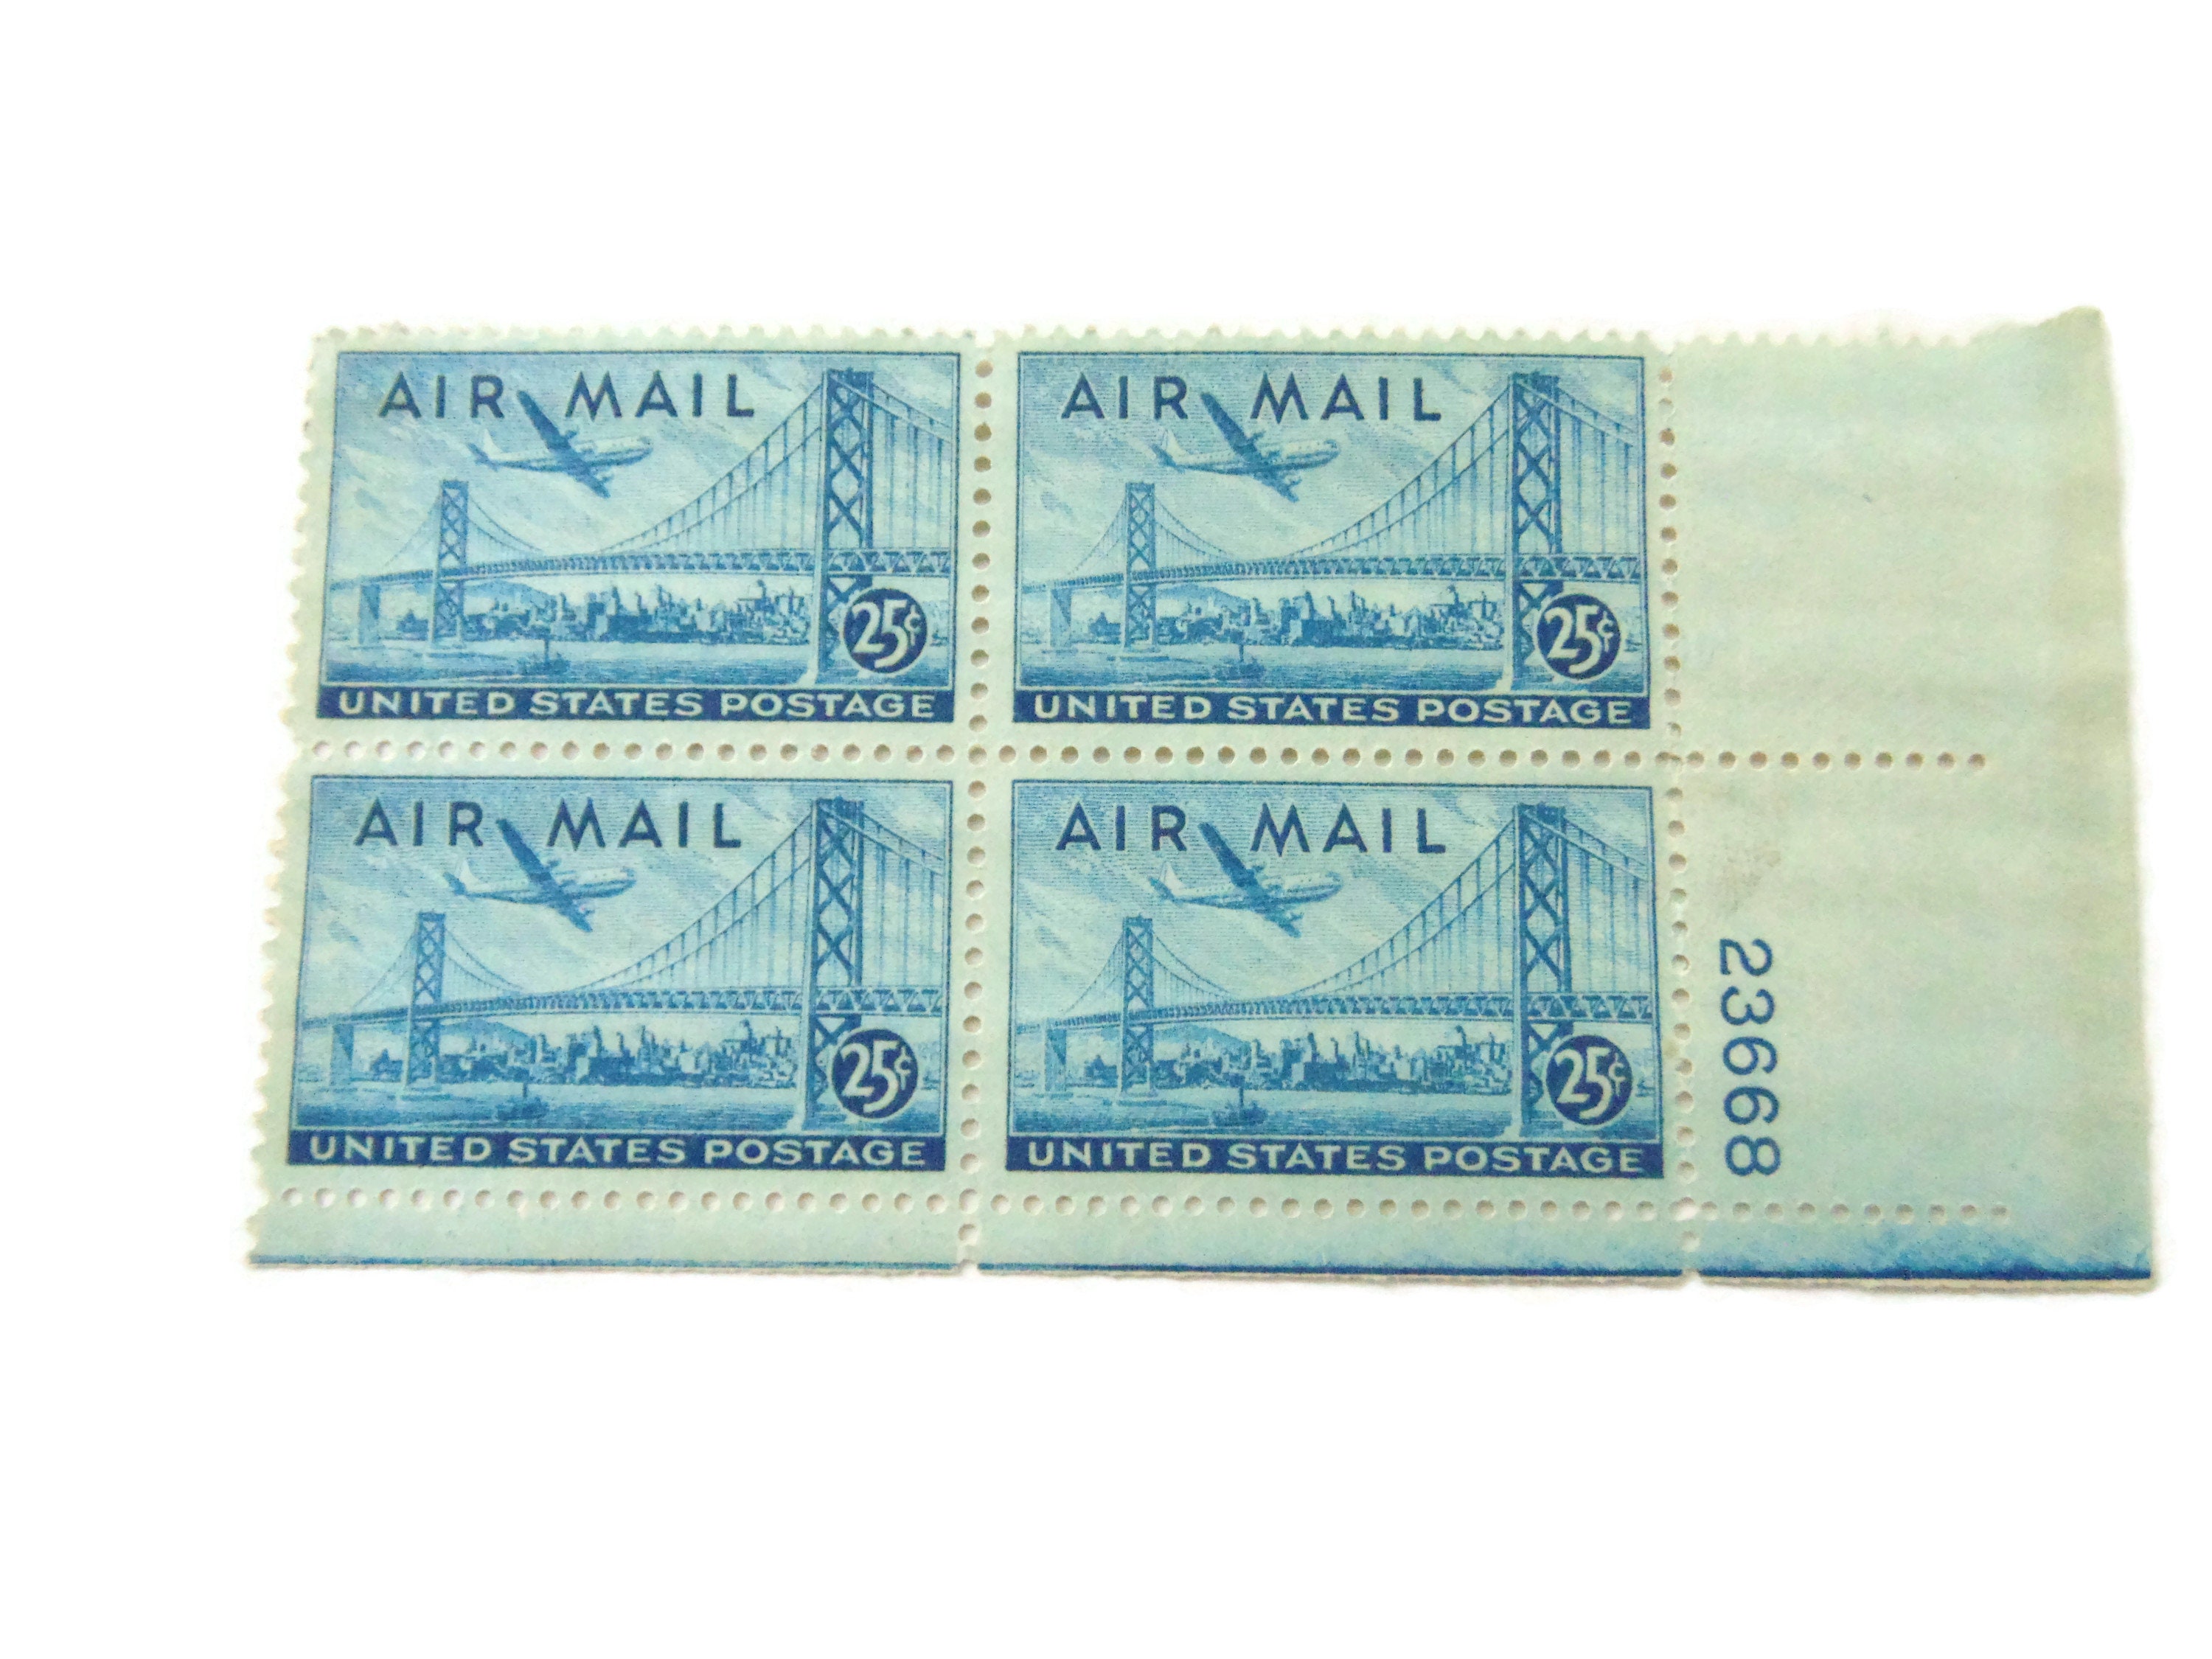 Sold Separately US Postage Air Mail Stamps 6c 25c 10c 7c Collectible  Airplanes 24784 23974 26047 23668 Gift For Him